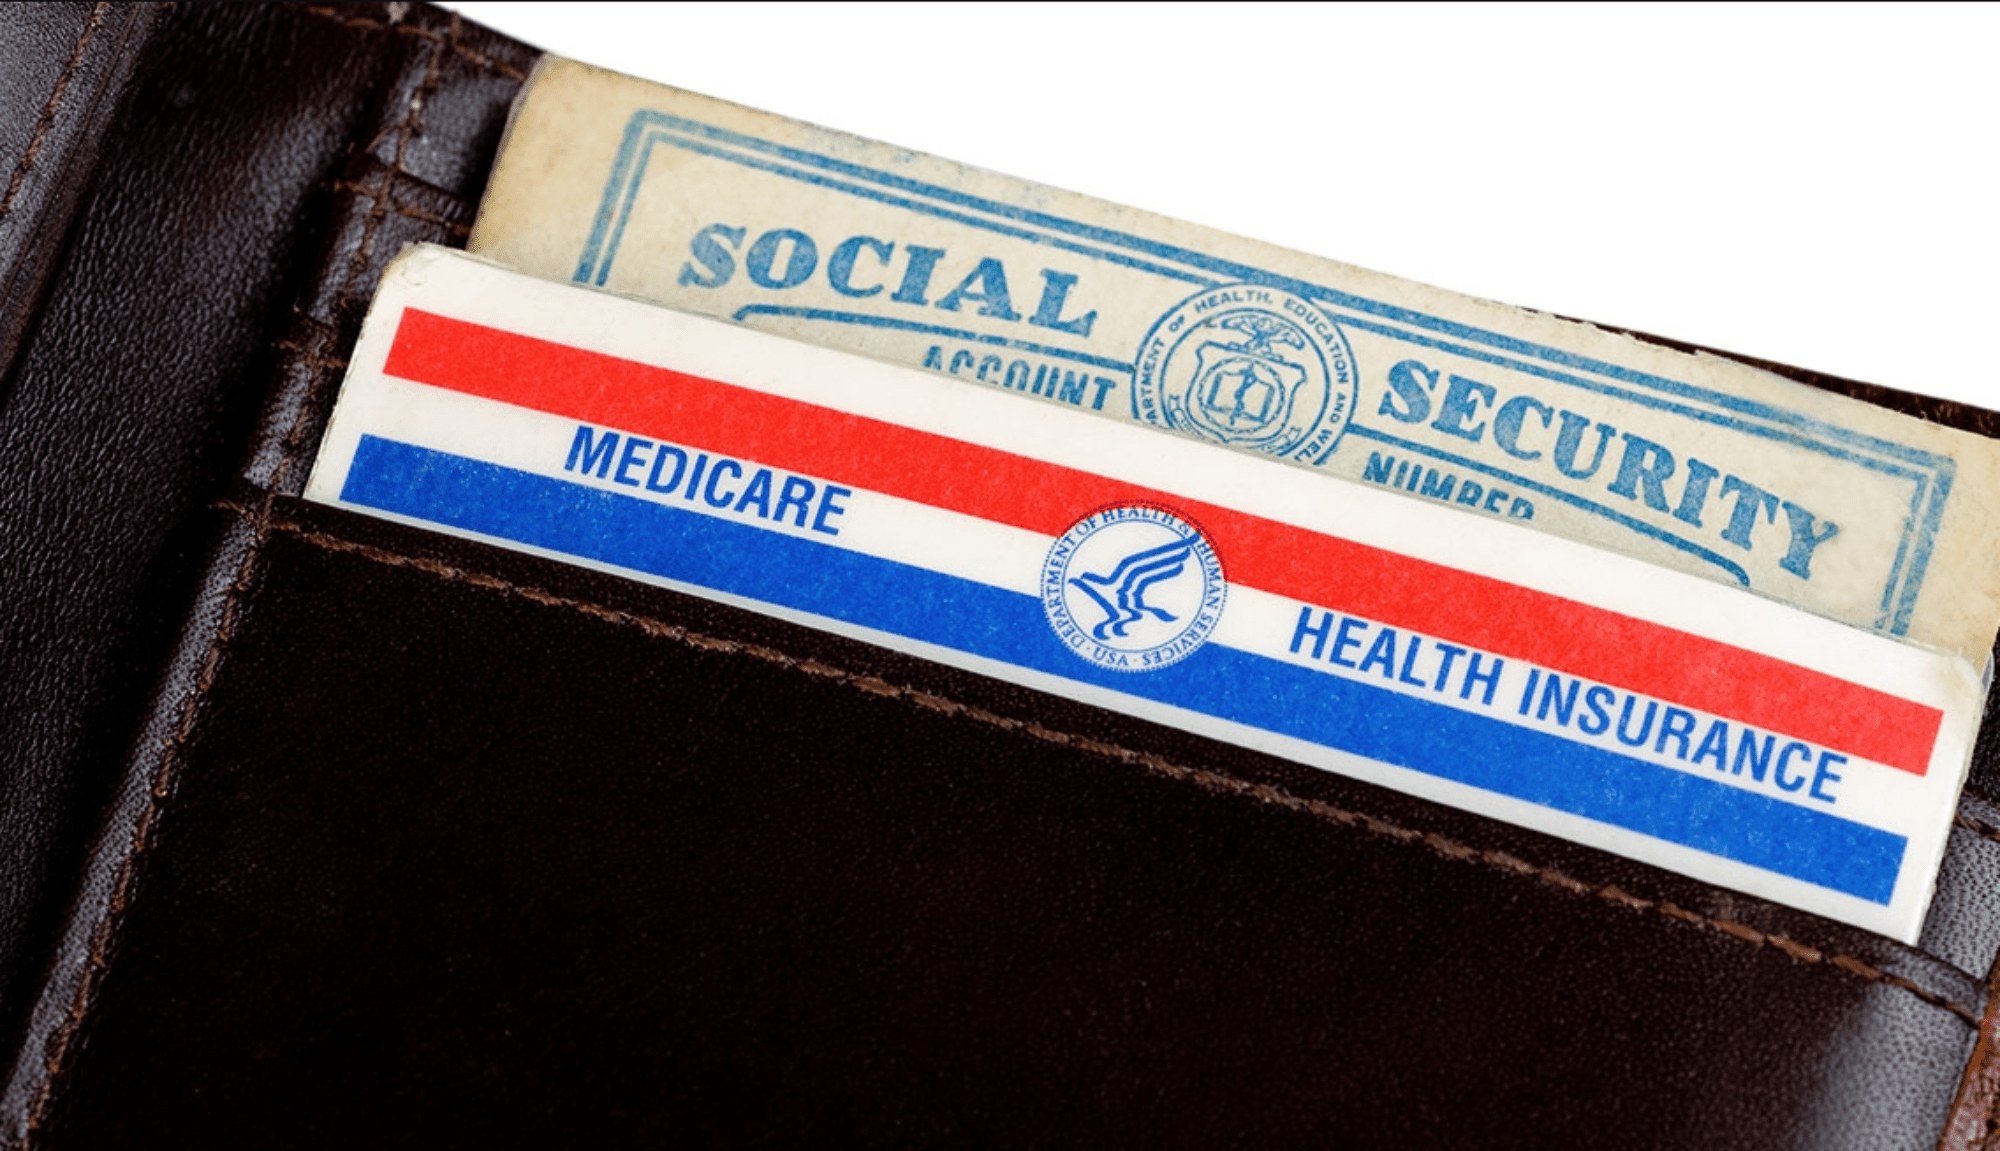 Social security card in a wallet.